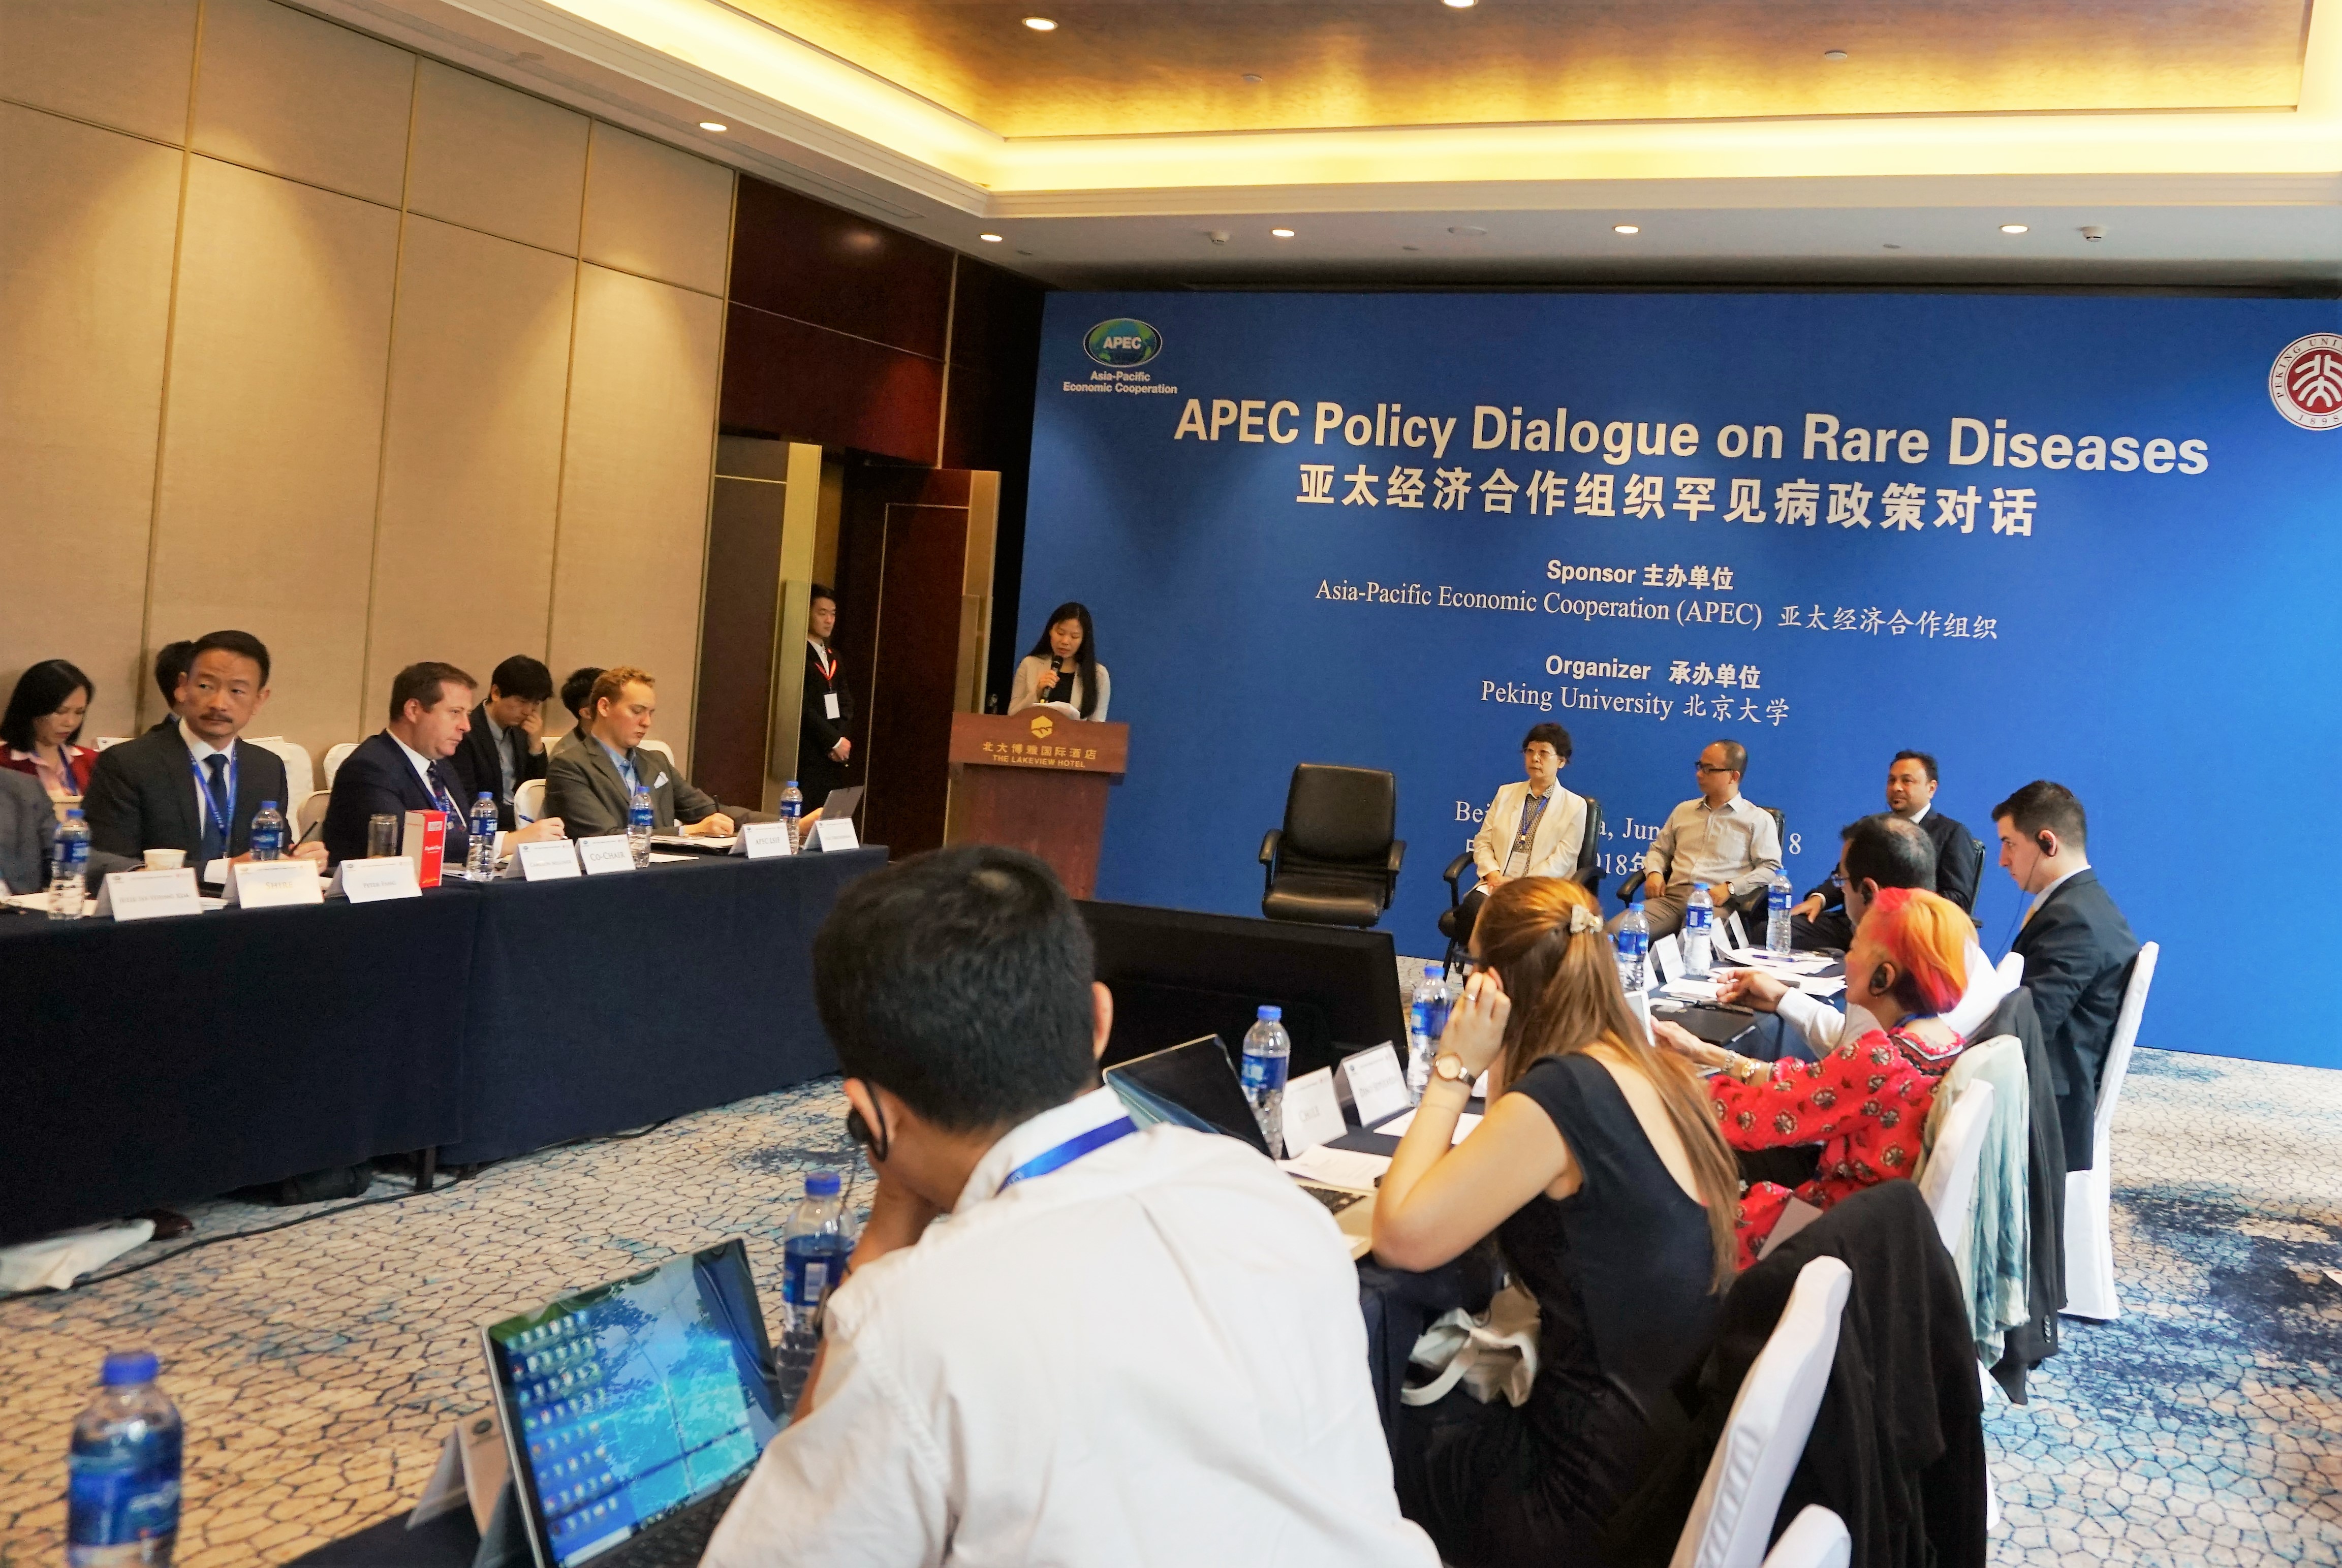 Panel at the 1st APEC Policy Dialogue on Rare Diseases, Beijing, China